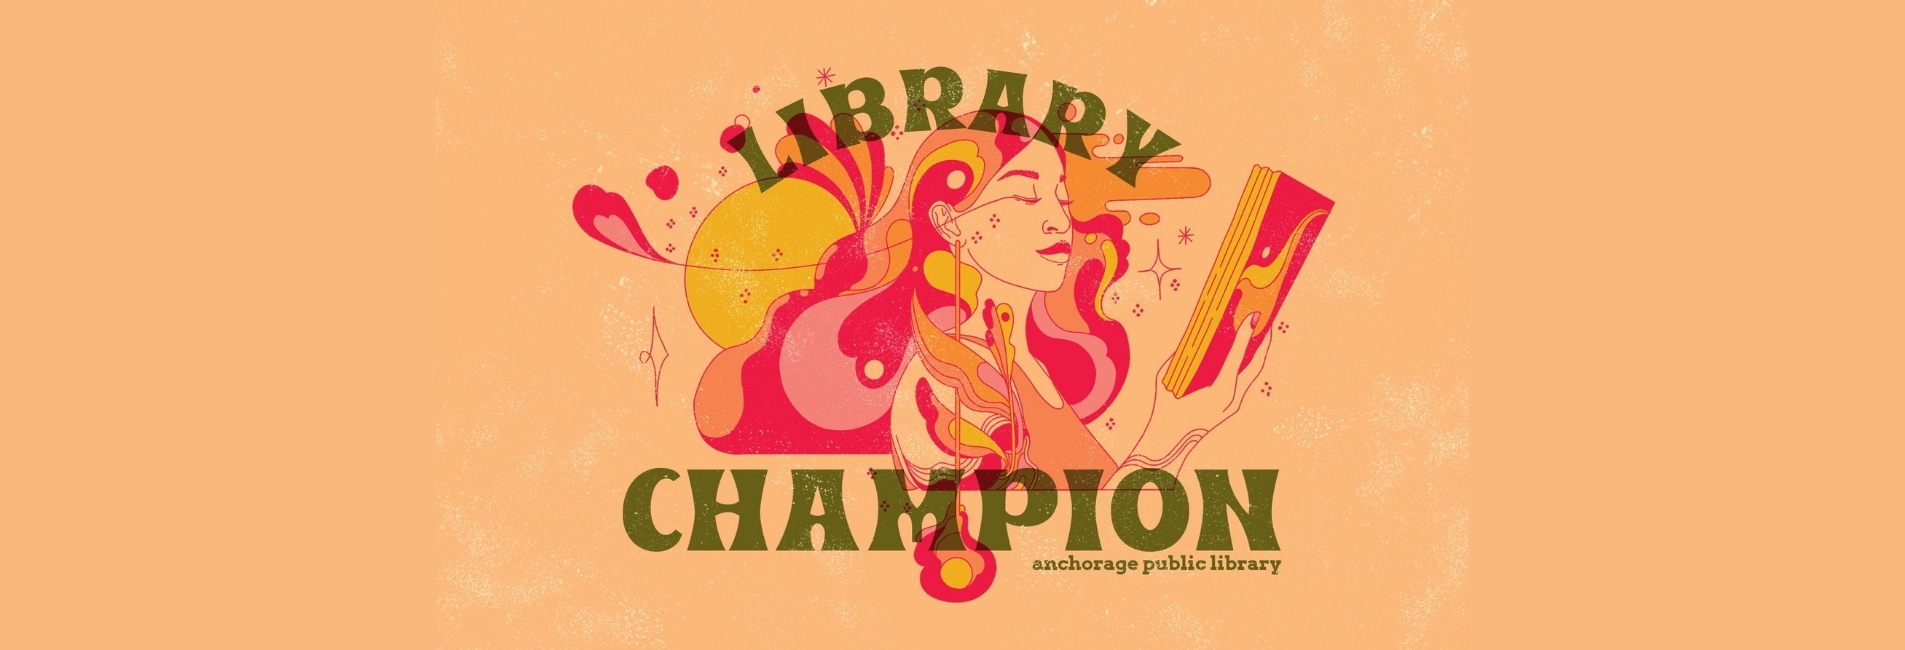 Library Champion website banner